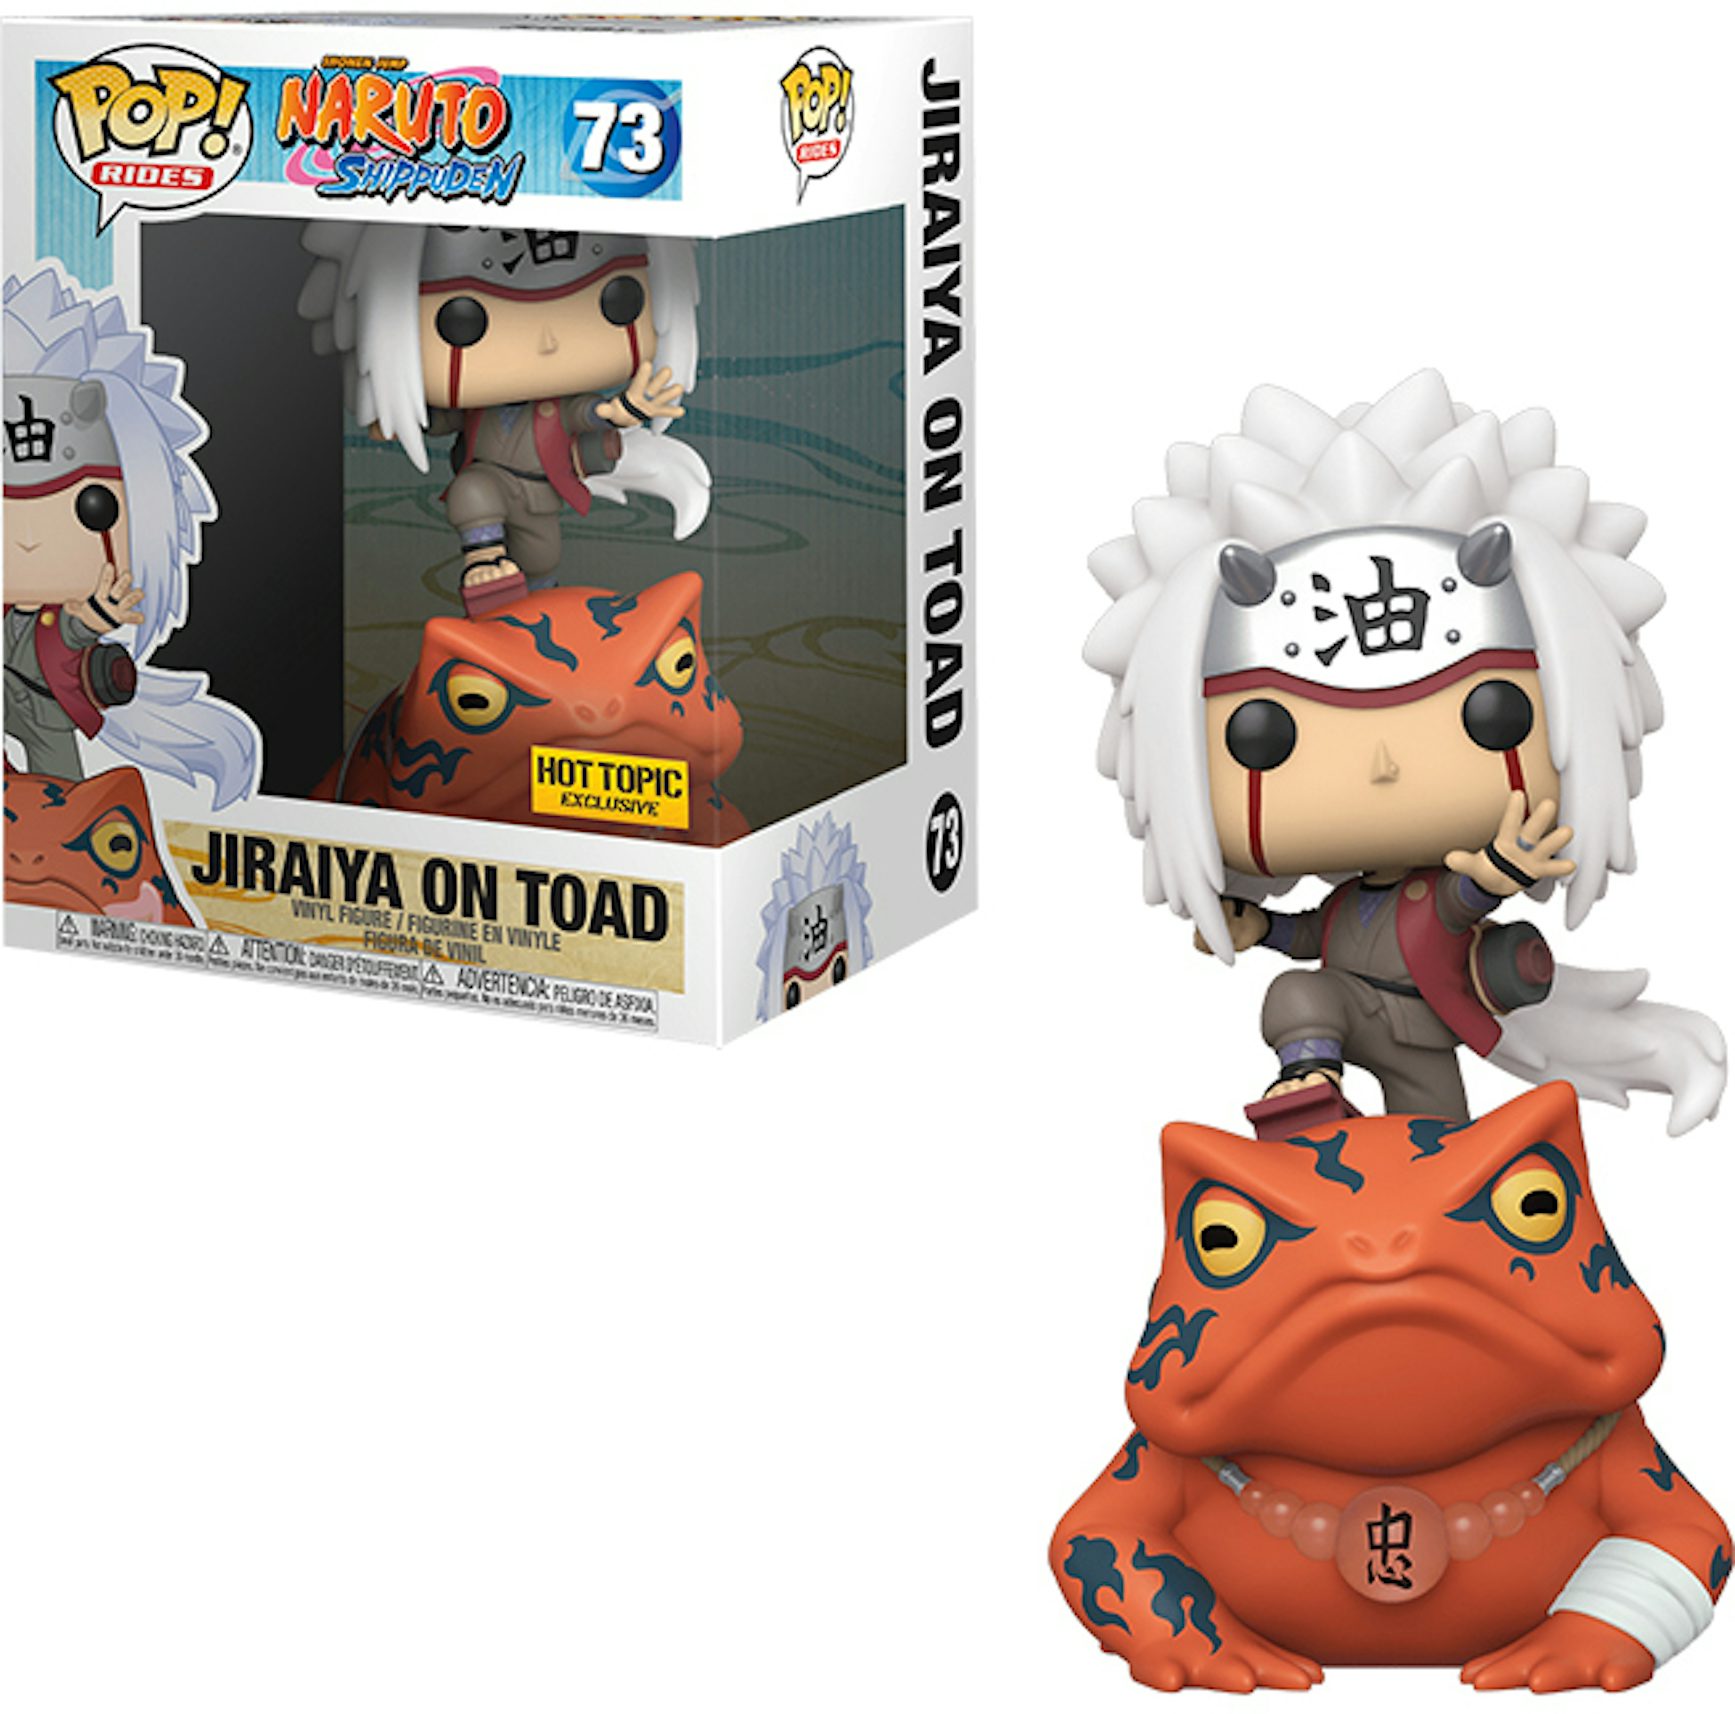 https://images.stockx.com/images/Funko-Pop-Rides-Naruto-Shippuden-Jiraiya-On-Toad-Hot-Topic-Exclusive-Figure-73.jpg?fit=fill&bg=FFFFFF&w=1200&h=857&fm=jpg&auto=compress&dpr=2&trim=color&updated_at=1625371782&q=60